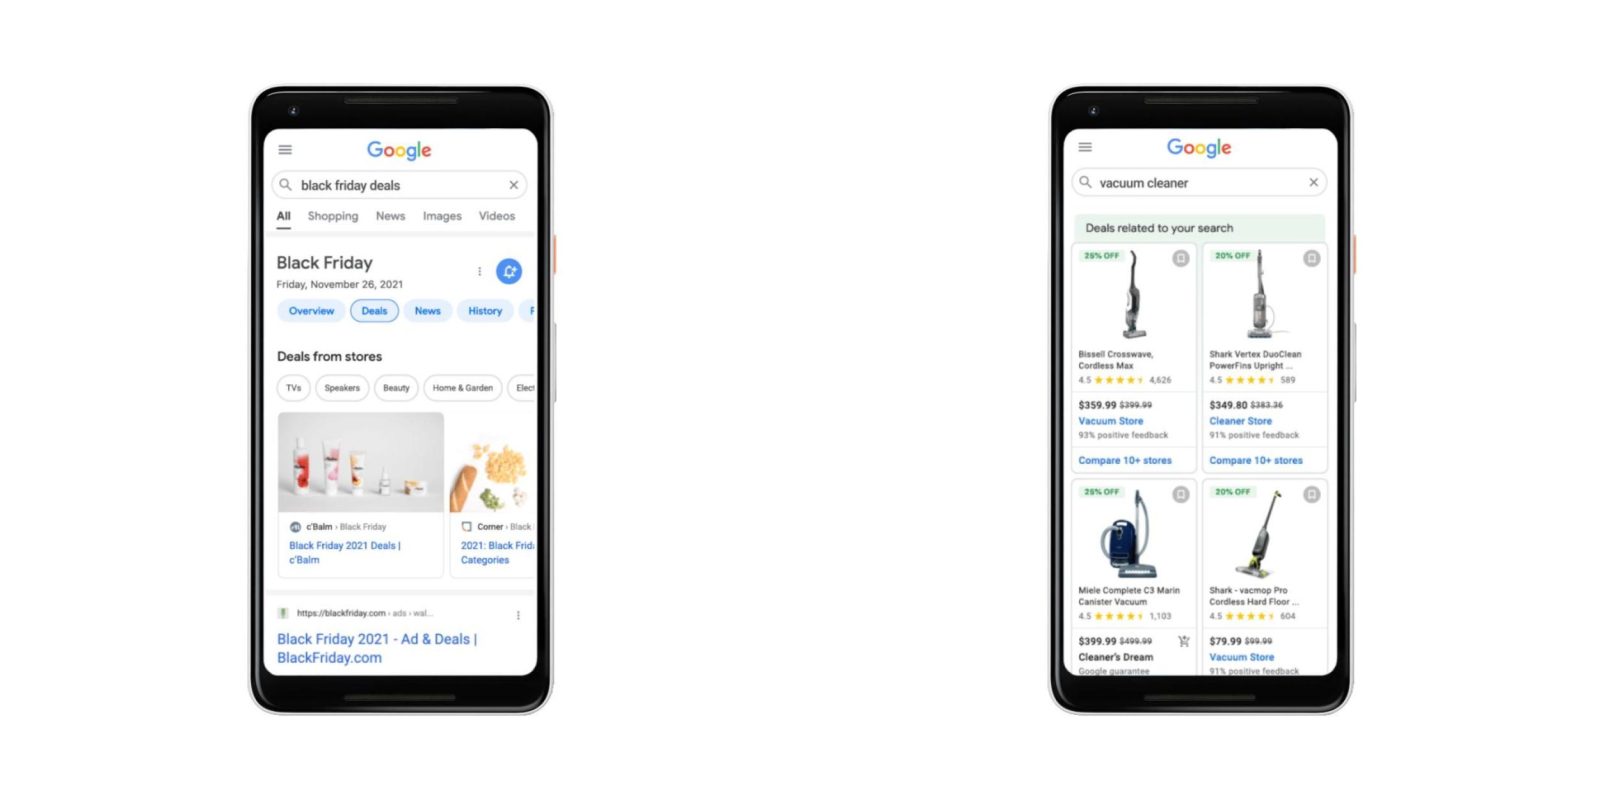 Google Shopping deals page